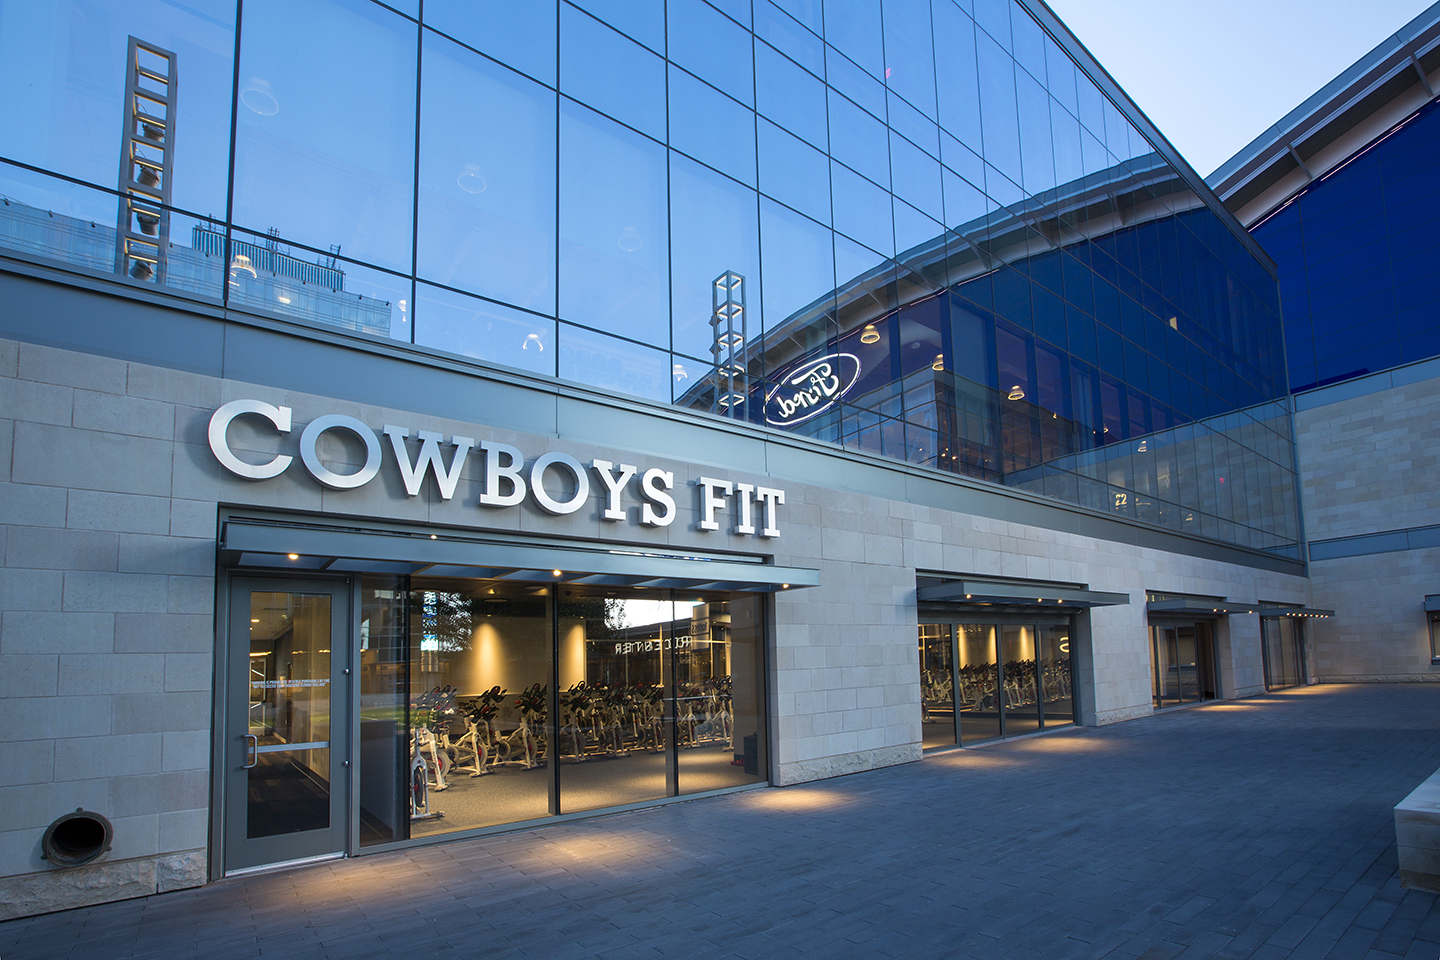 Cowboys Fit at the Star in Frisco 